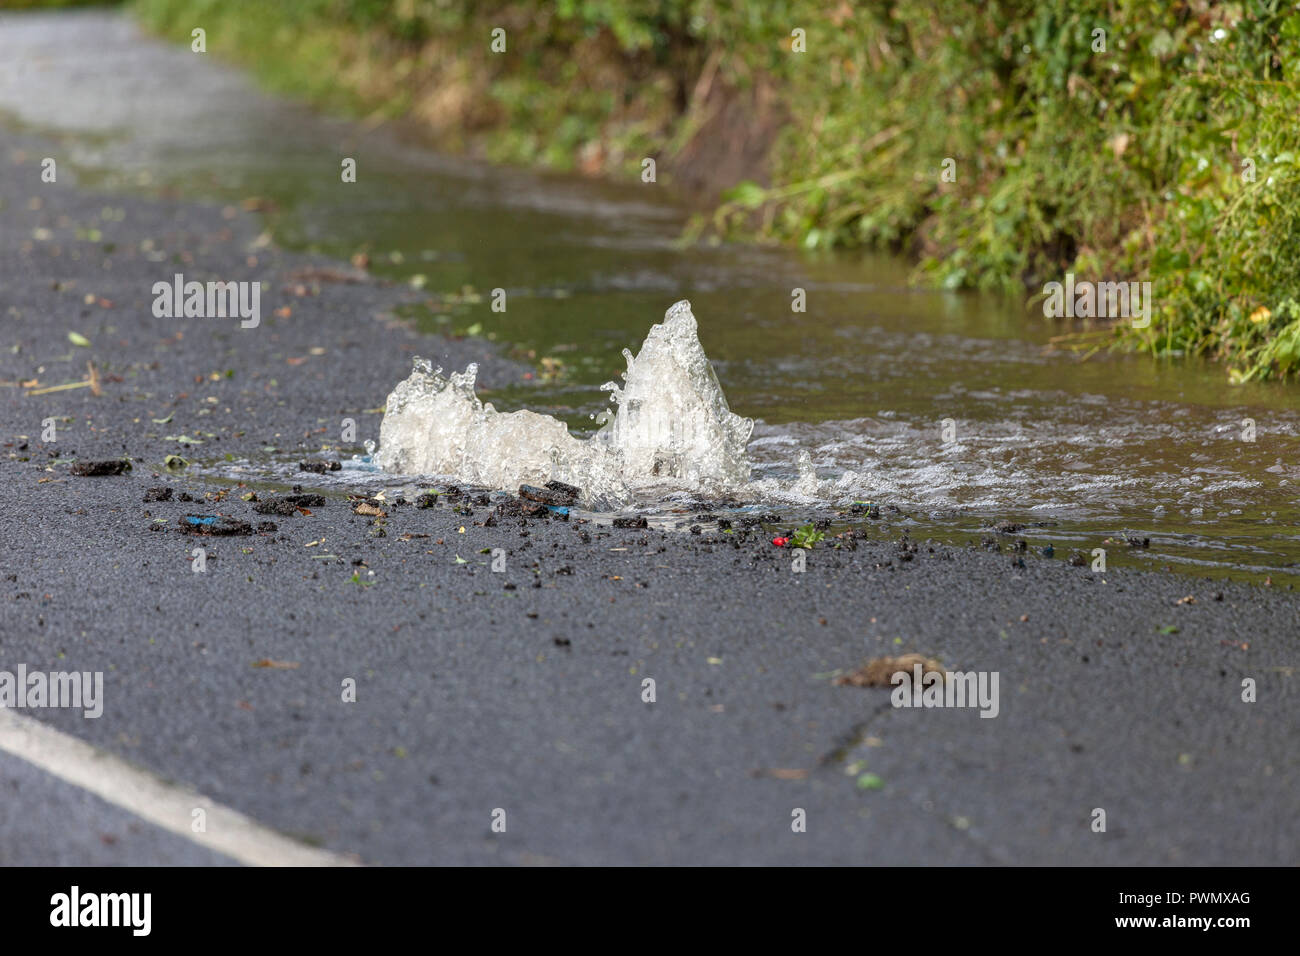 Water Spouting from a Burst Water Main in the Road, County Durham, UK Stock Photo